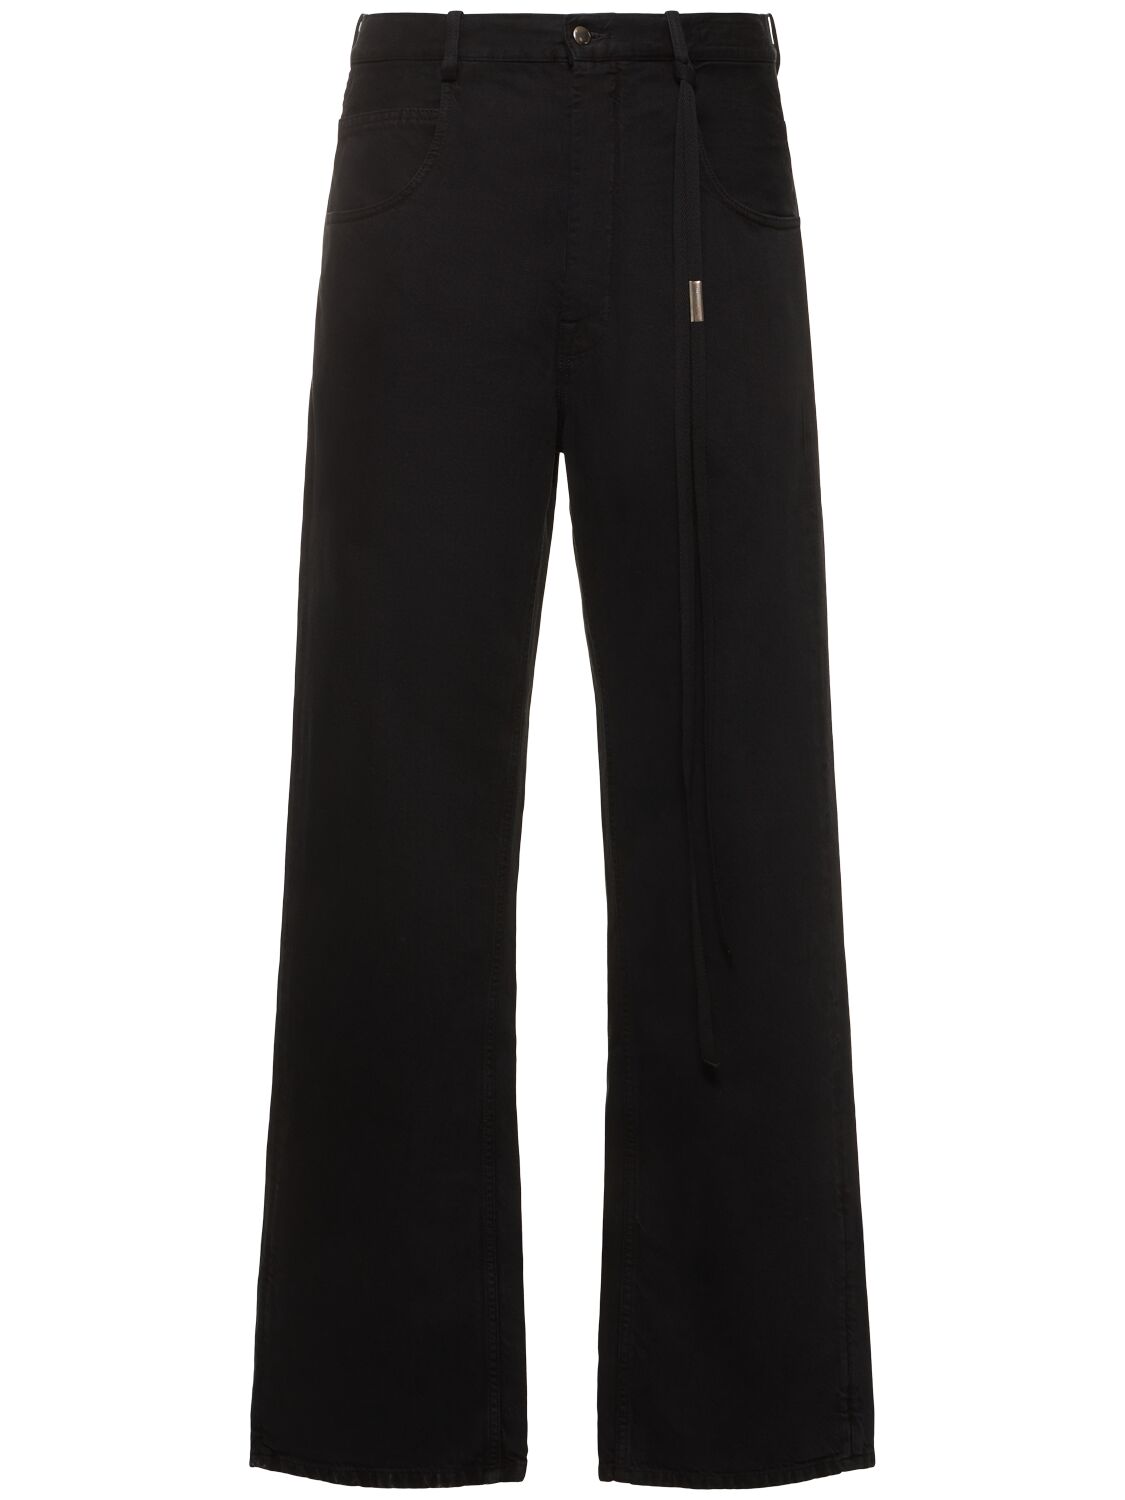 Ann Demeulemeester Ronald 5 Pocket Cotton Trousers In Black